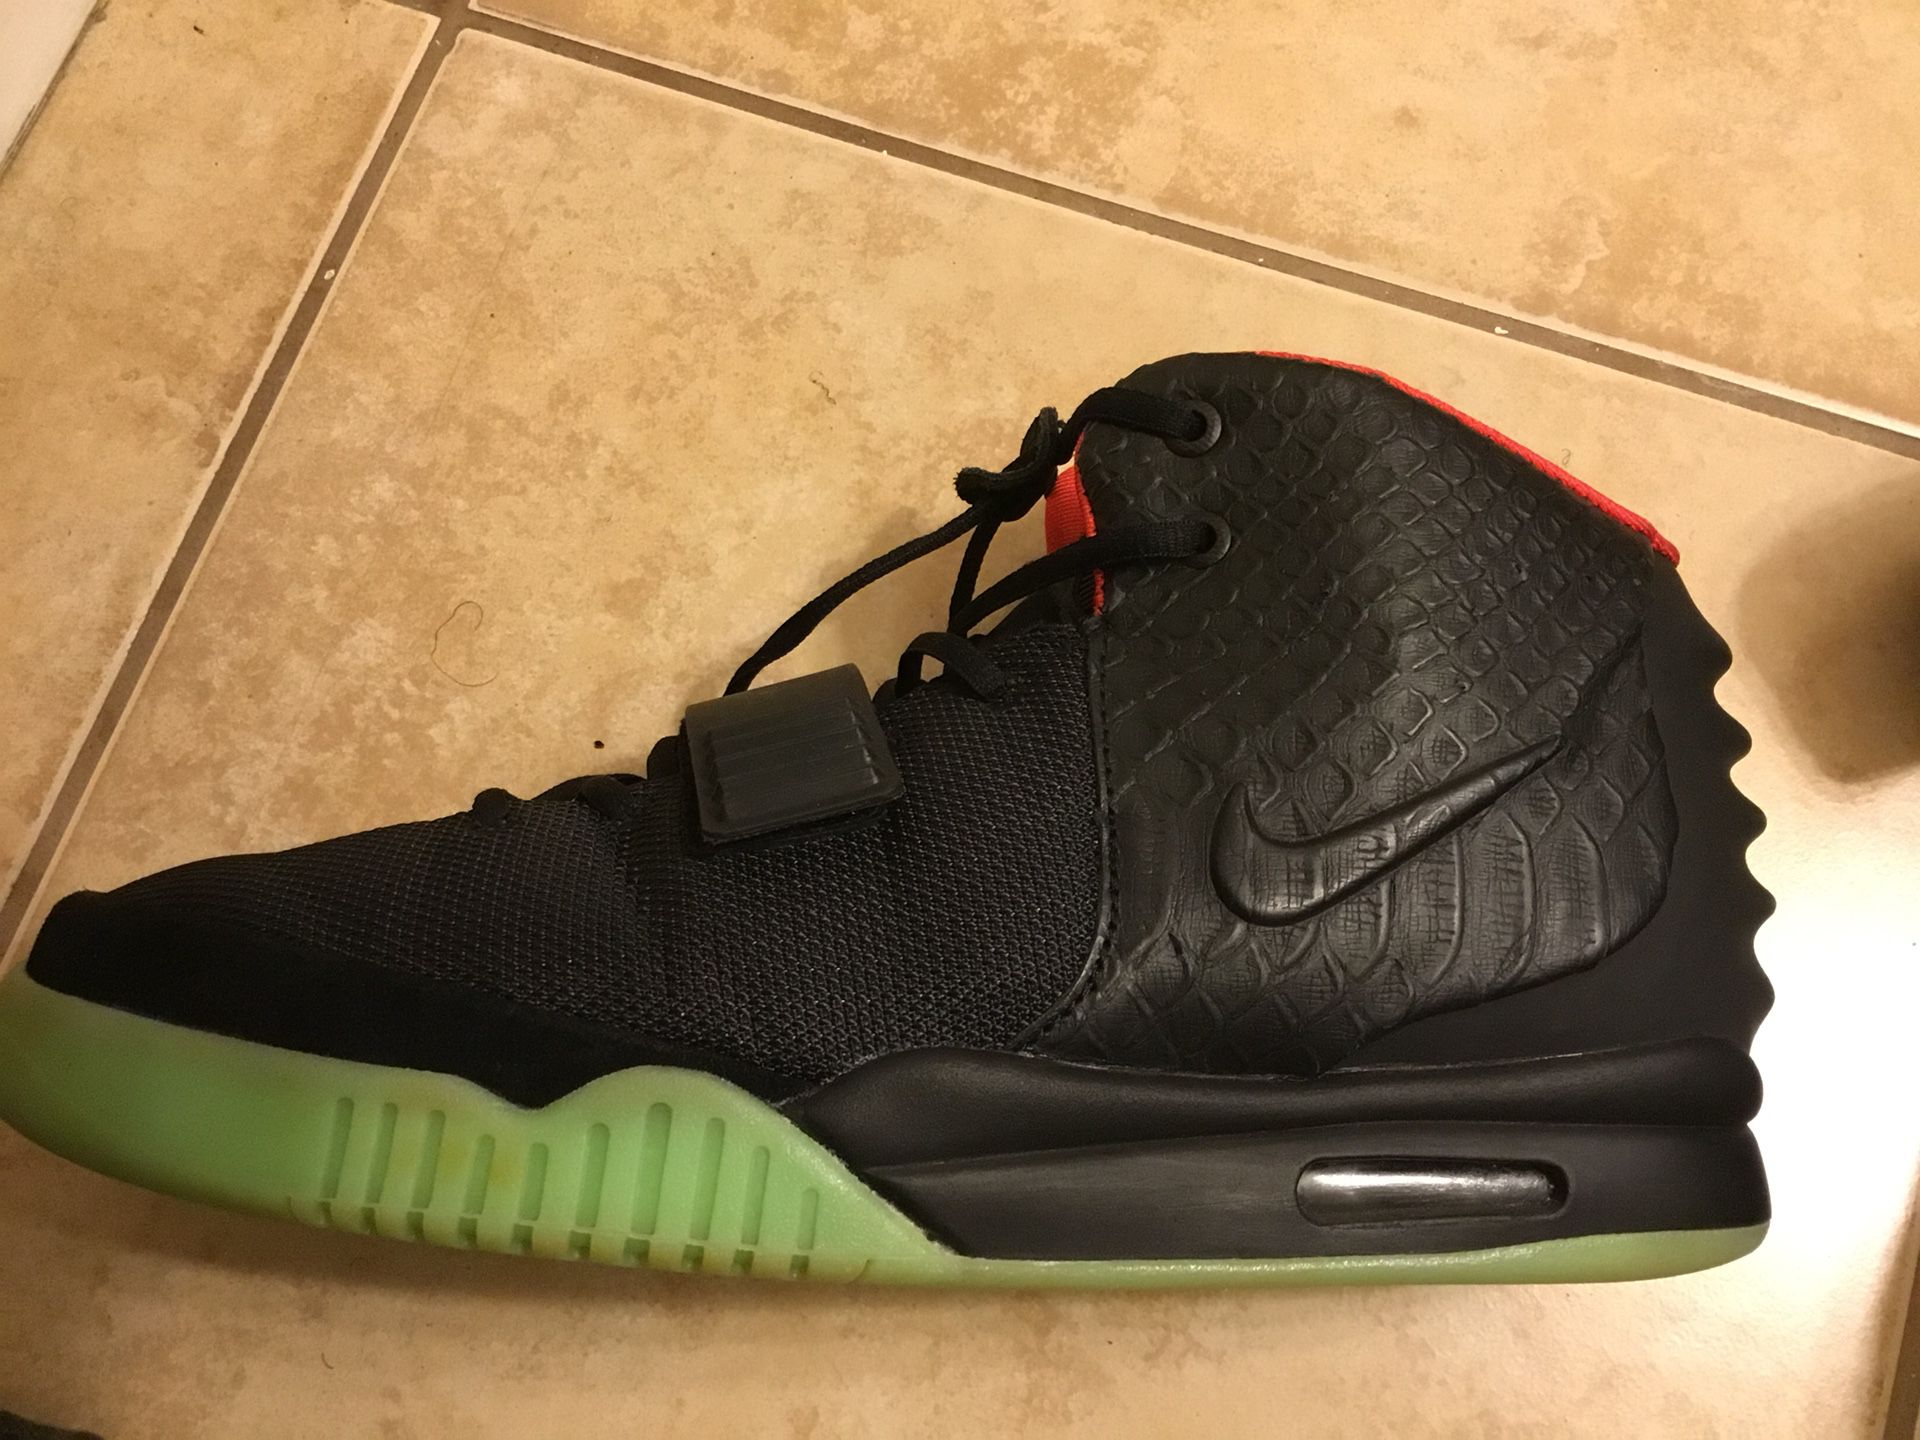 kanye west shoes nike air yeezy black friday color, Offers